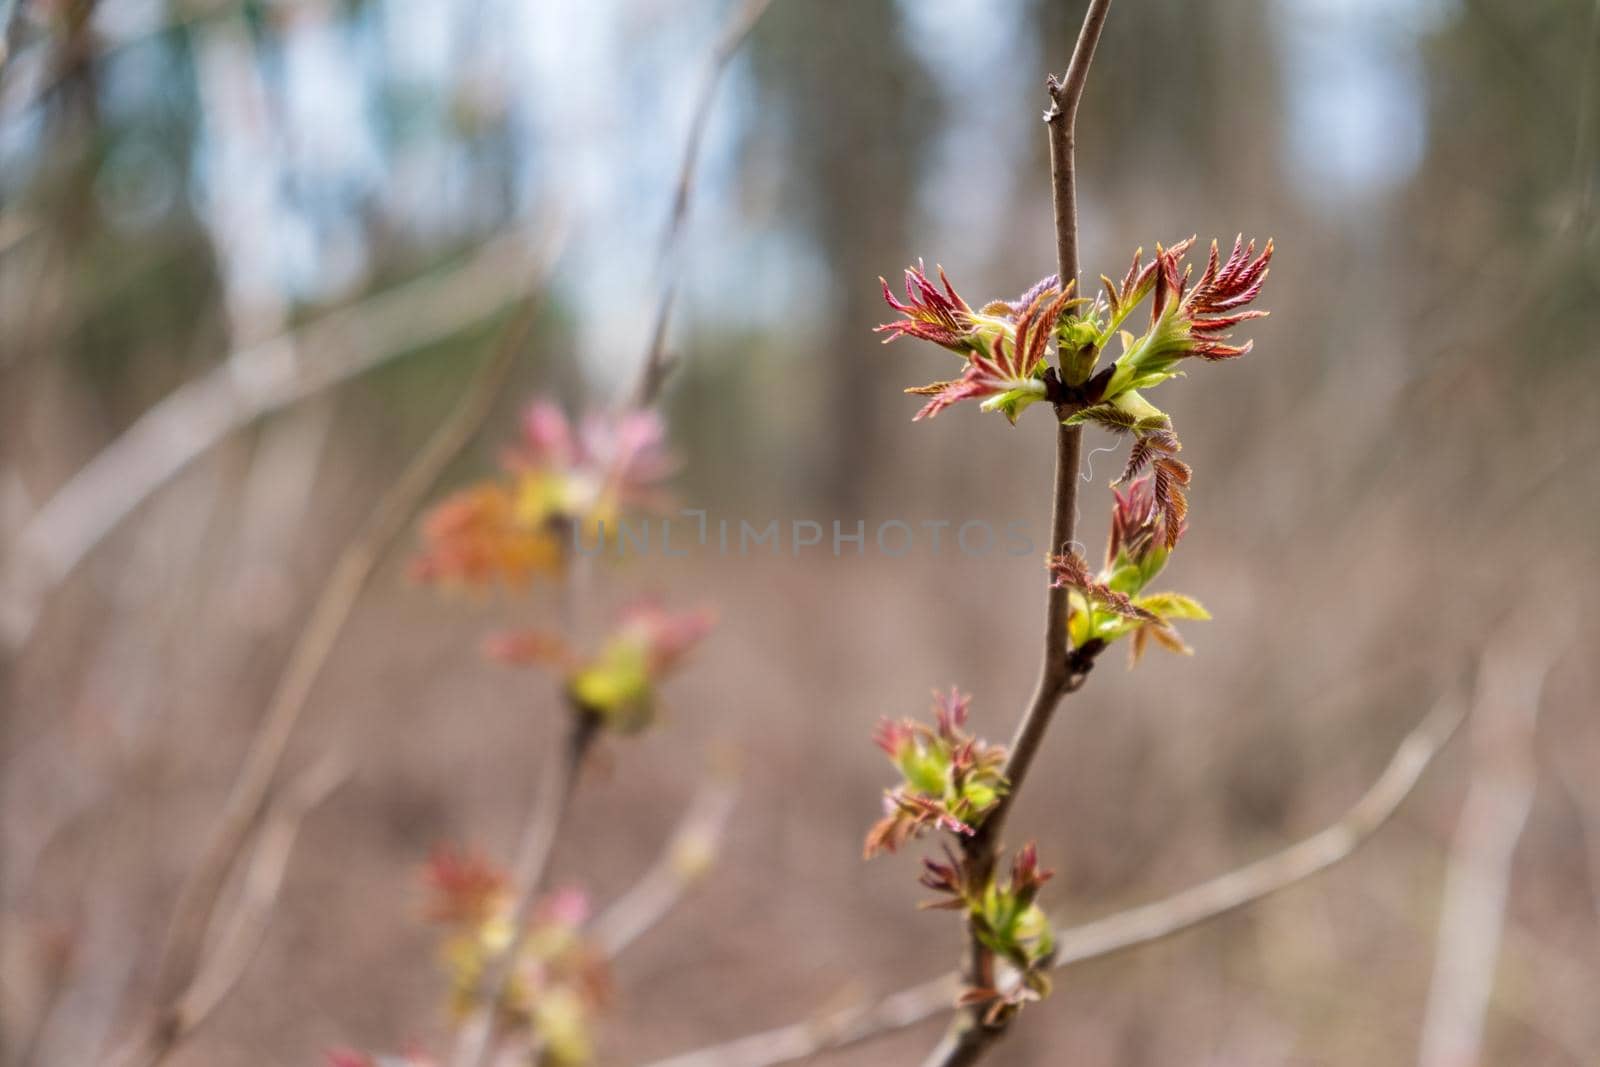 Sprig of a plant with young leaves in the spring in the forest. Selective focus.